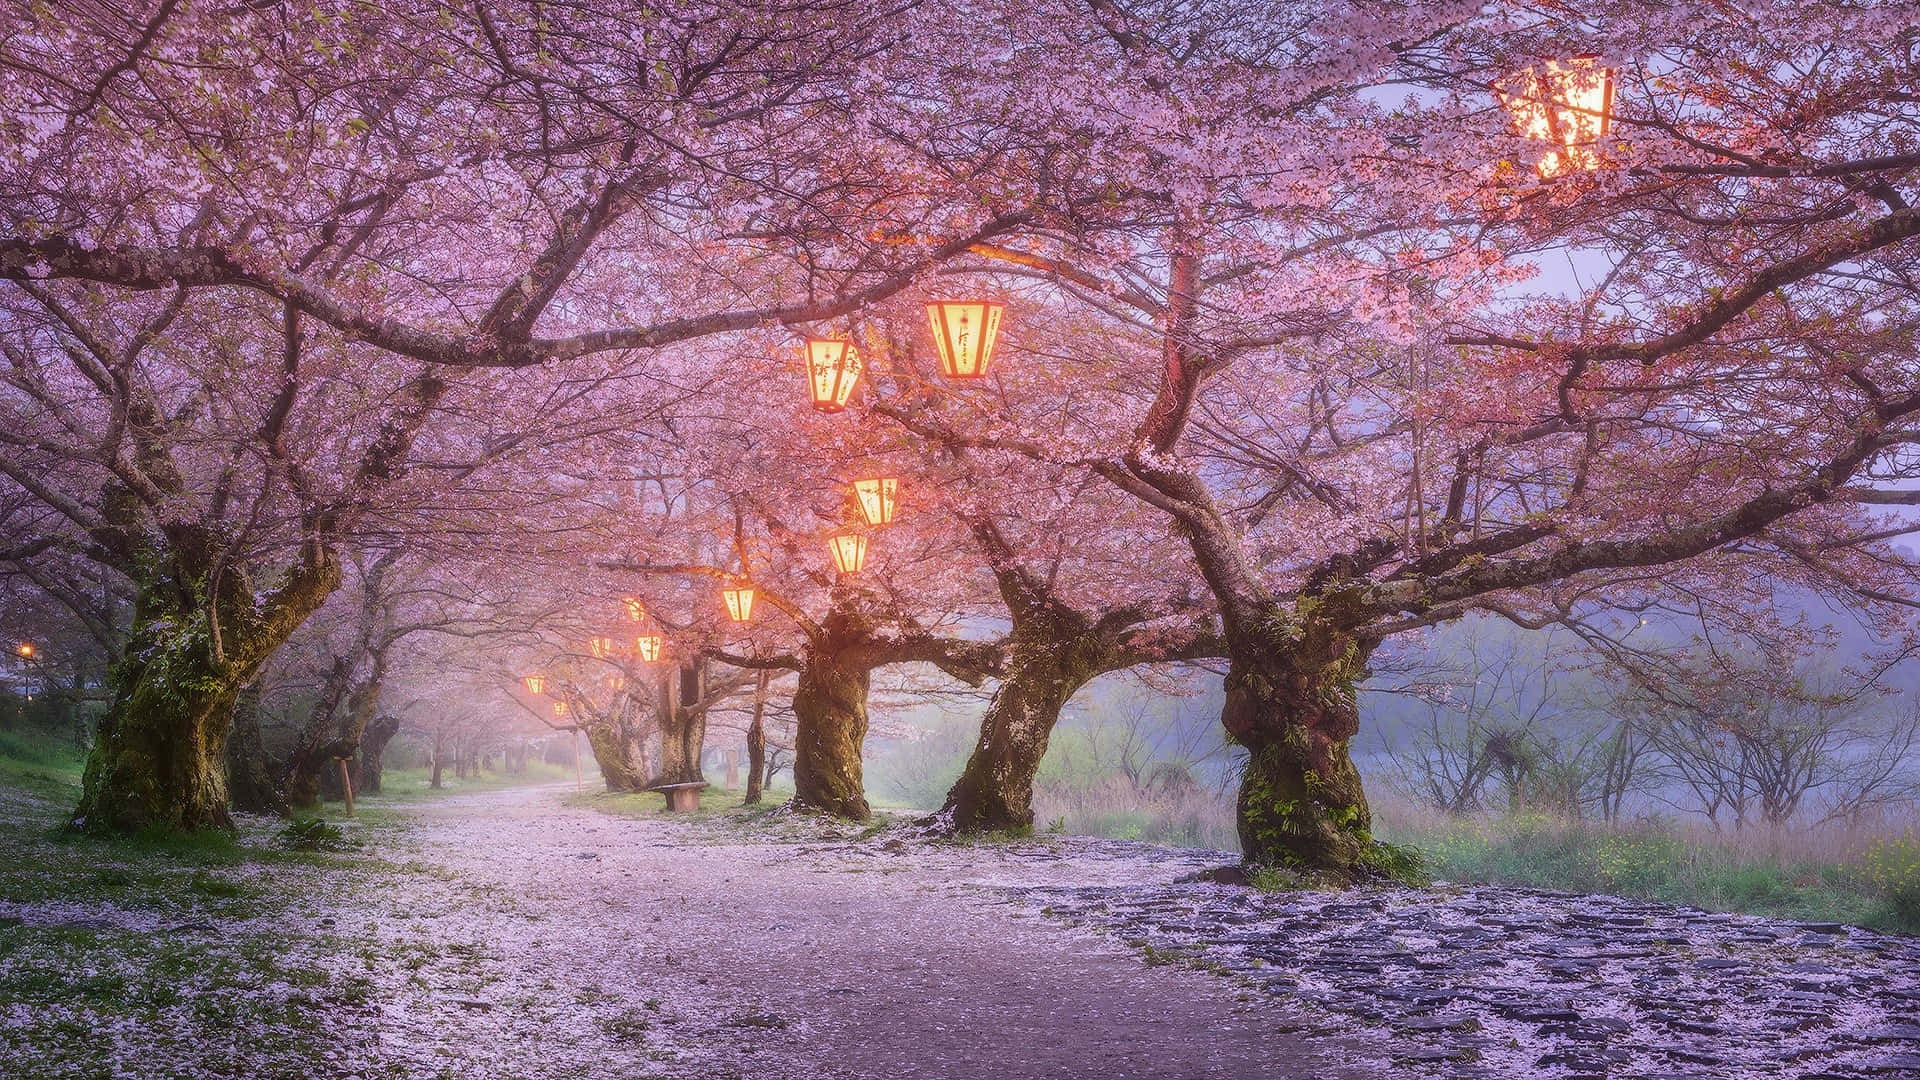 Caption: Blooming Cherry Blossom Tree in Spring